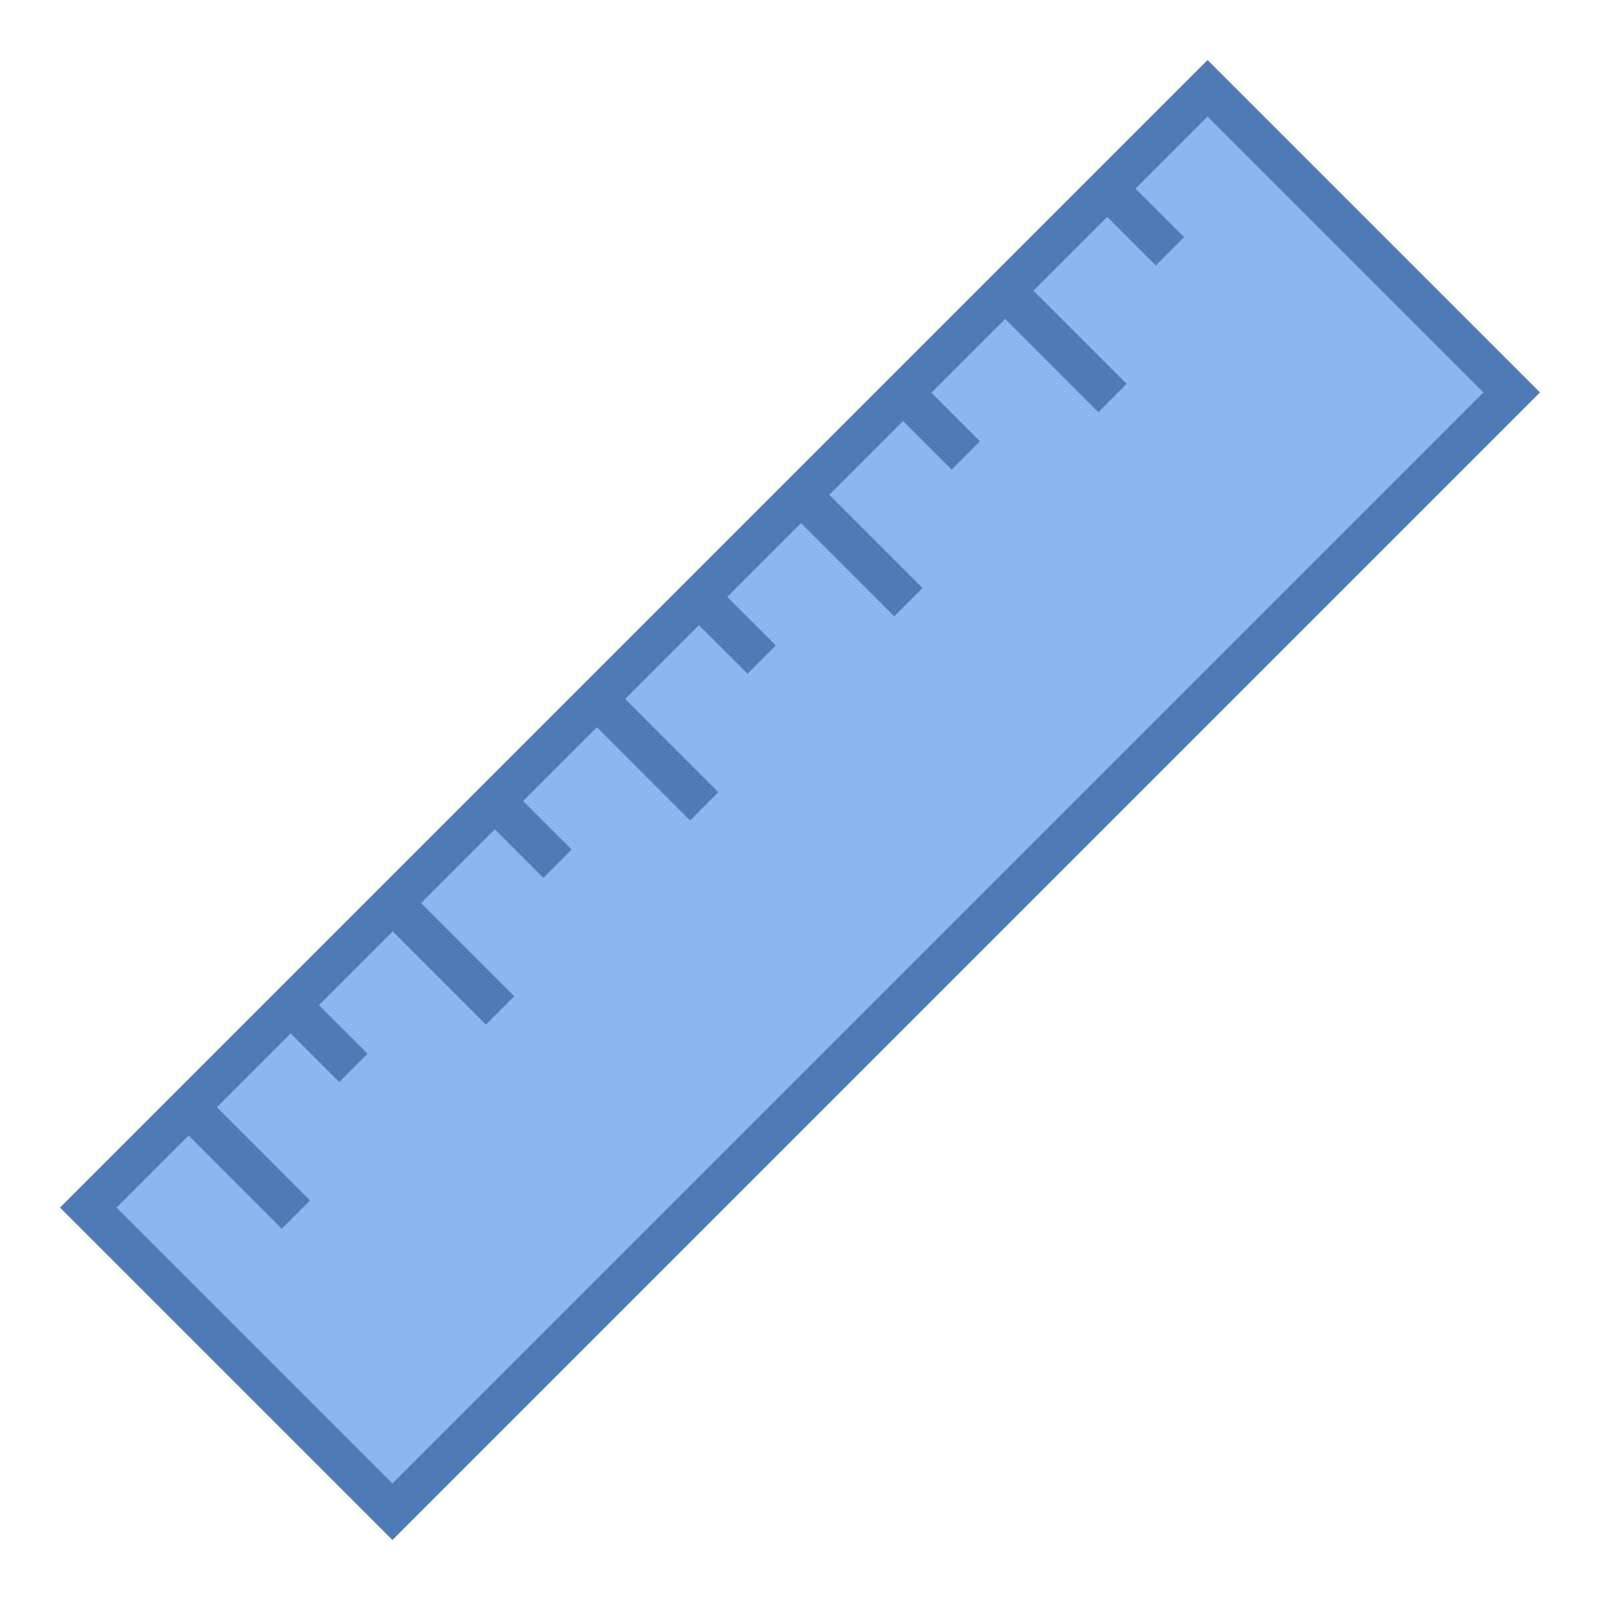 ruler icon download icons #22991